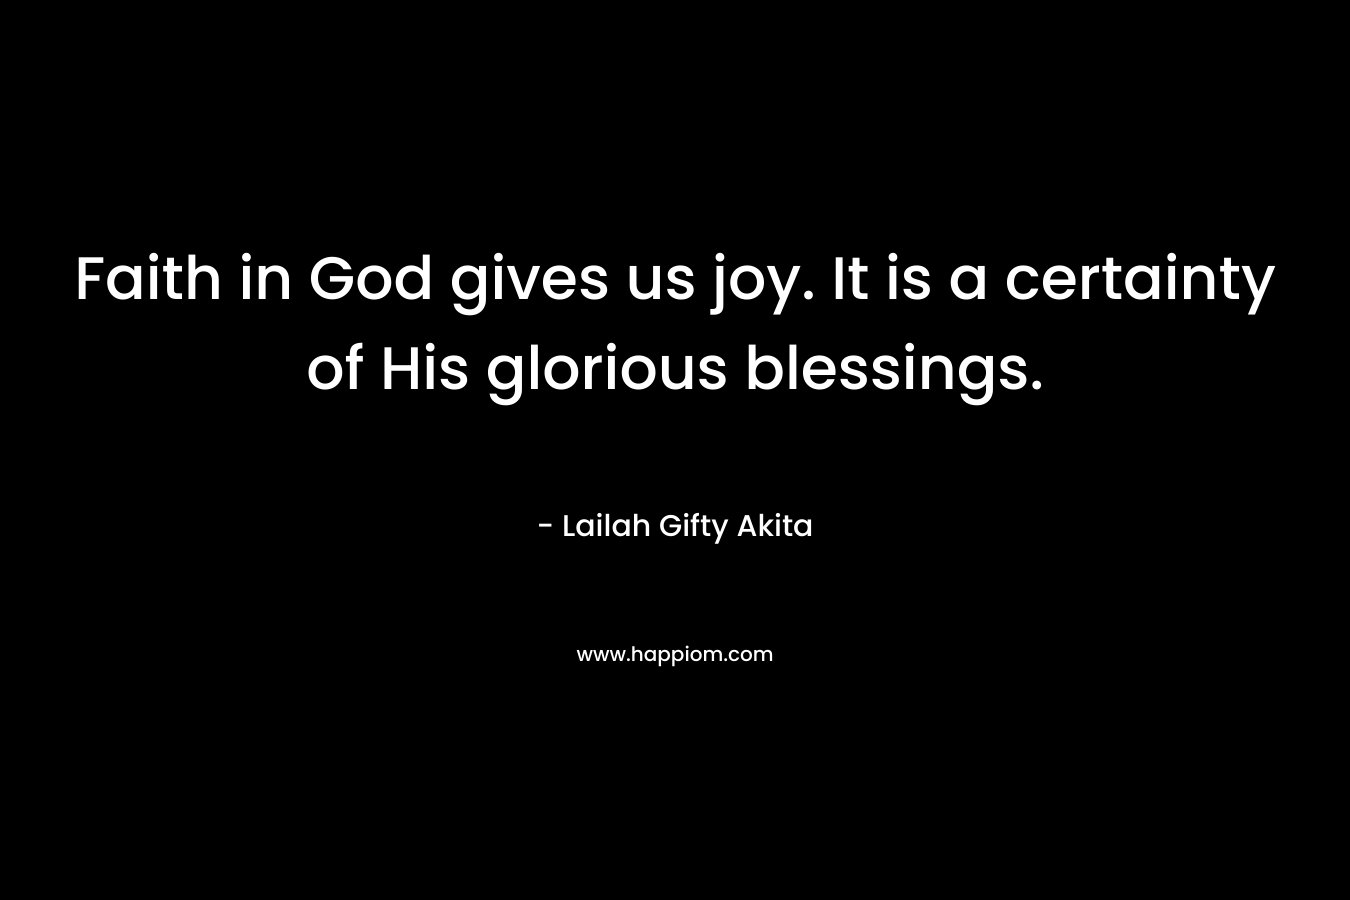 Faith in God gives us joy. It is a certainty of His glorious blessings.